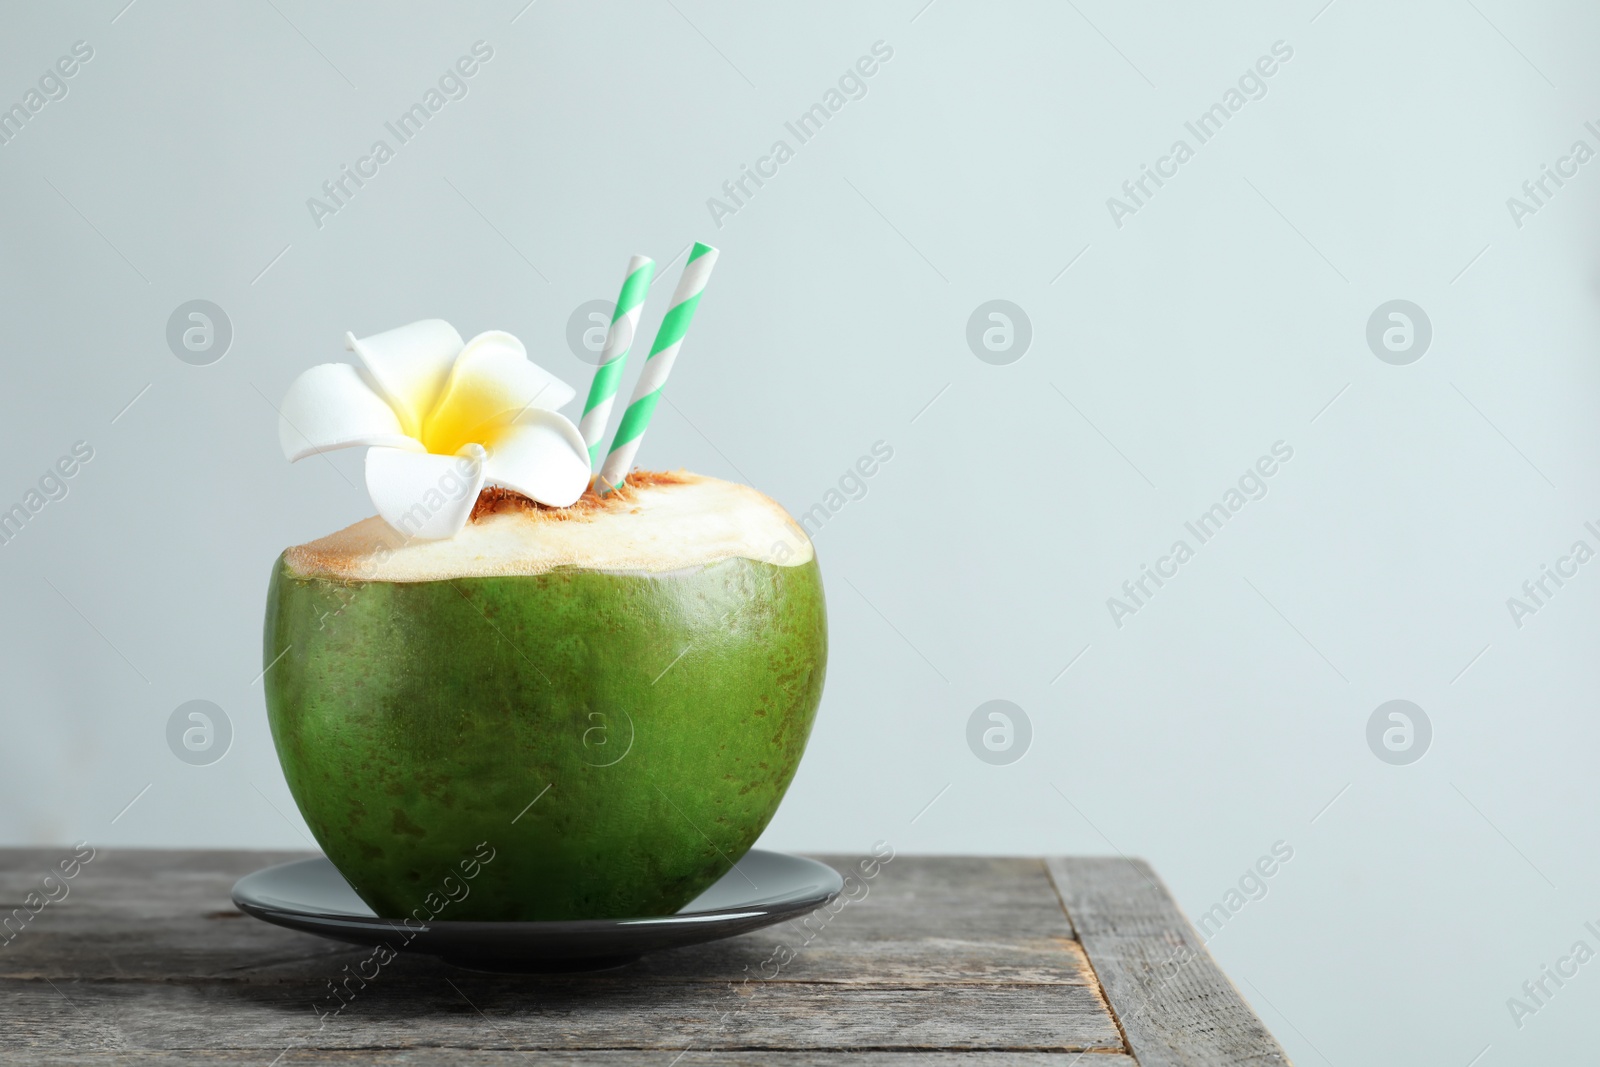 Photo of Fresh green coconut with drinking straws and flower on table against light background